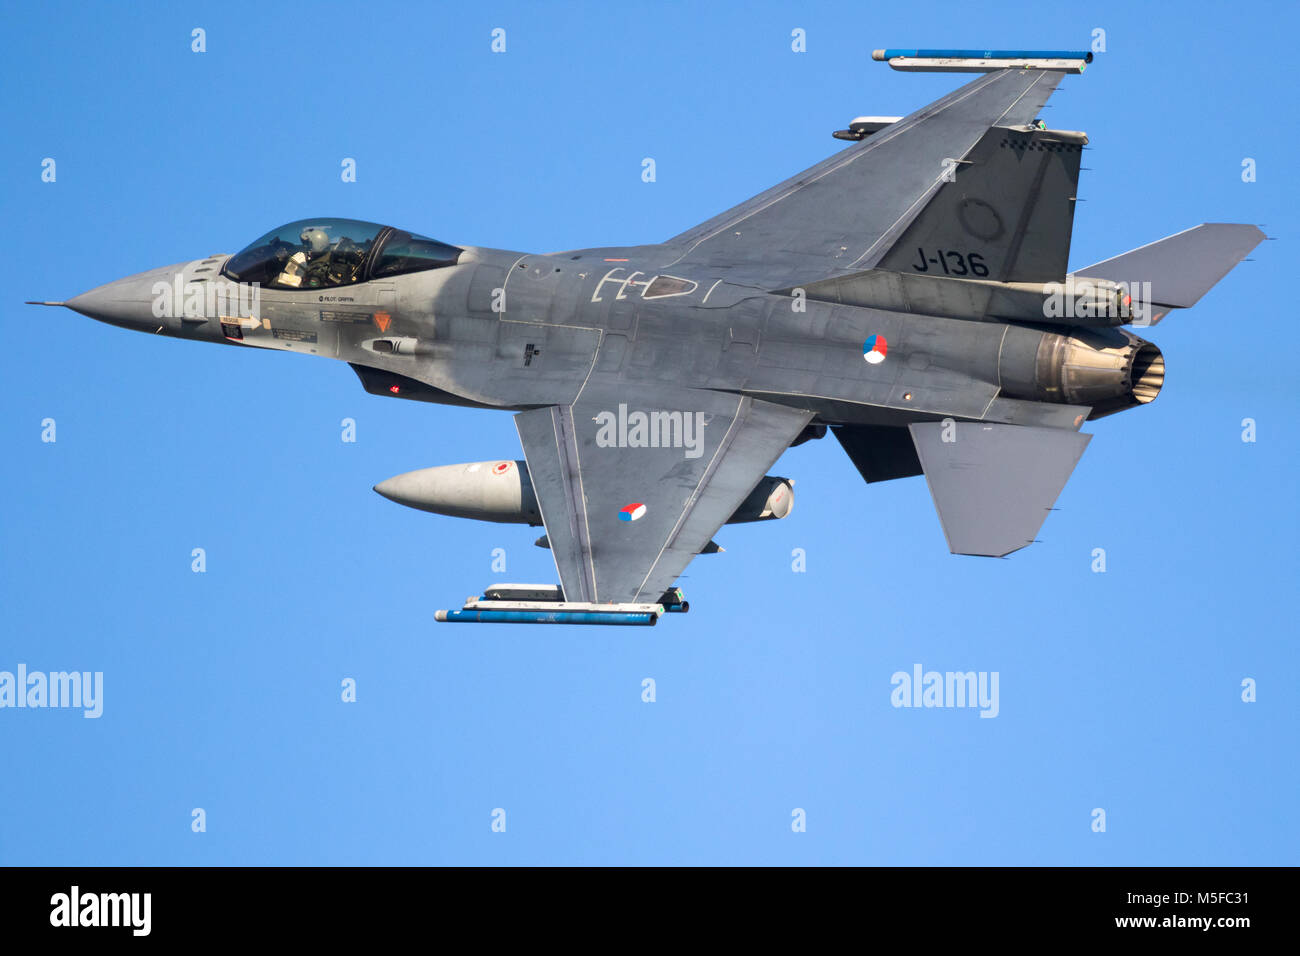 LEEUWARDEN, THE NETHERLANDS - MRT 28, 2017: Royal Netherlands Air Force F-16 fighter jet plane taking off during NATO exercise Frisian Flag Stock Photo